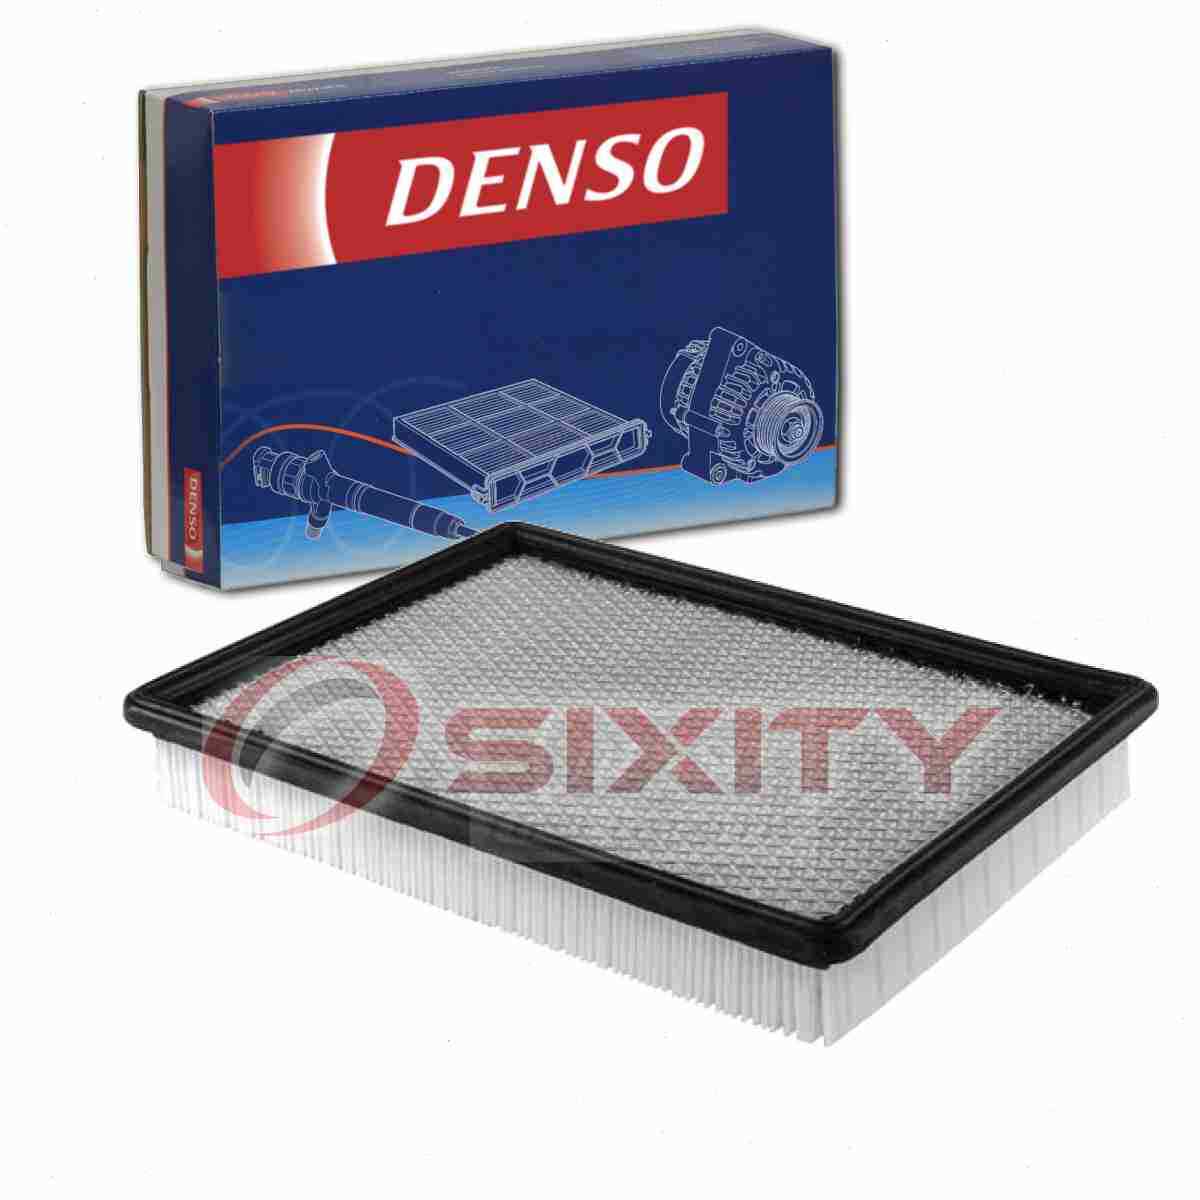 DENSO 143-3365 Air Filter for CA8754 CA6479 A35330 A34479 46153 25096932 kz